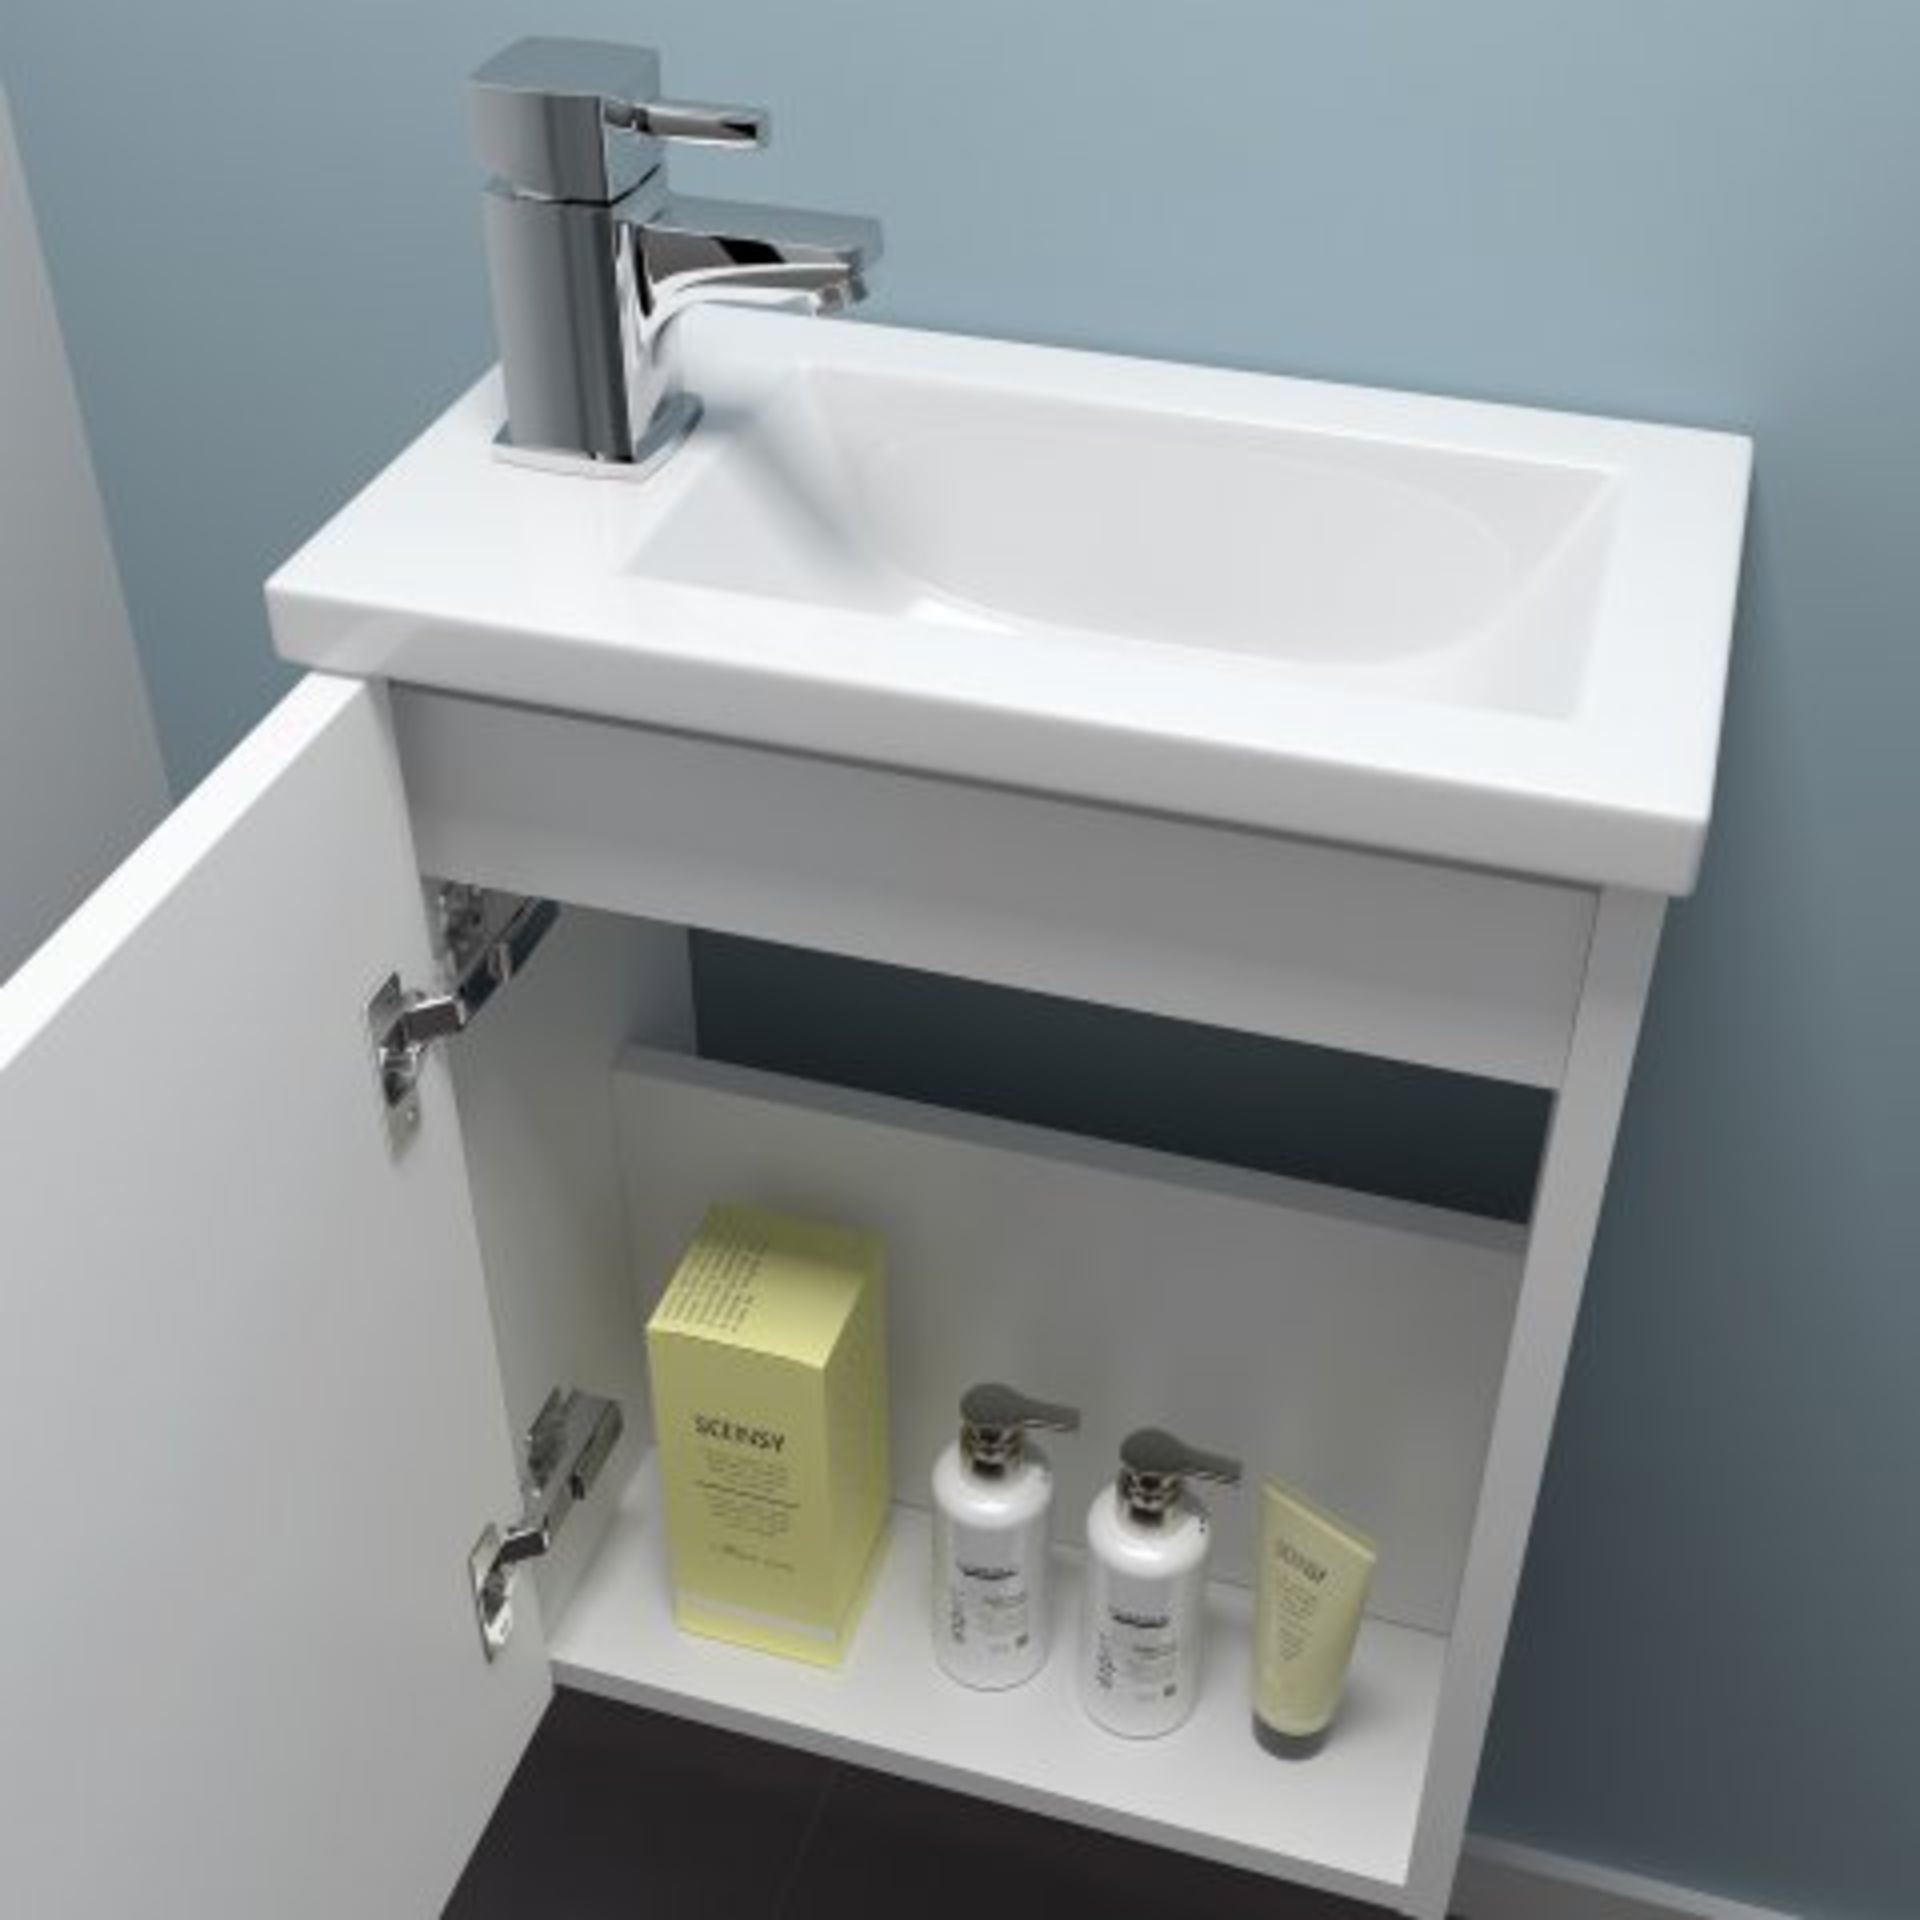 (K182) 400mm Blanc Matte White Basin Unit - Wall Hung. RRP £179.99. Freeing up floor space and - Image 2 of 5